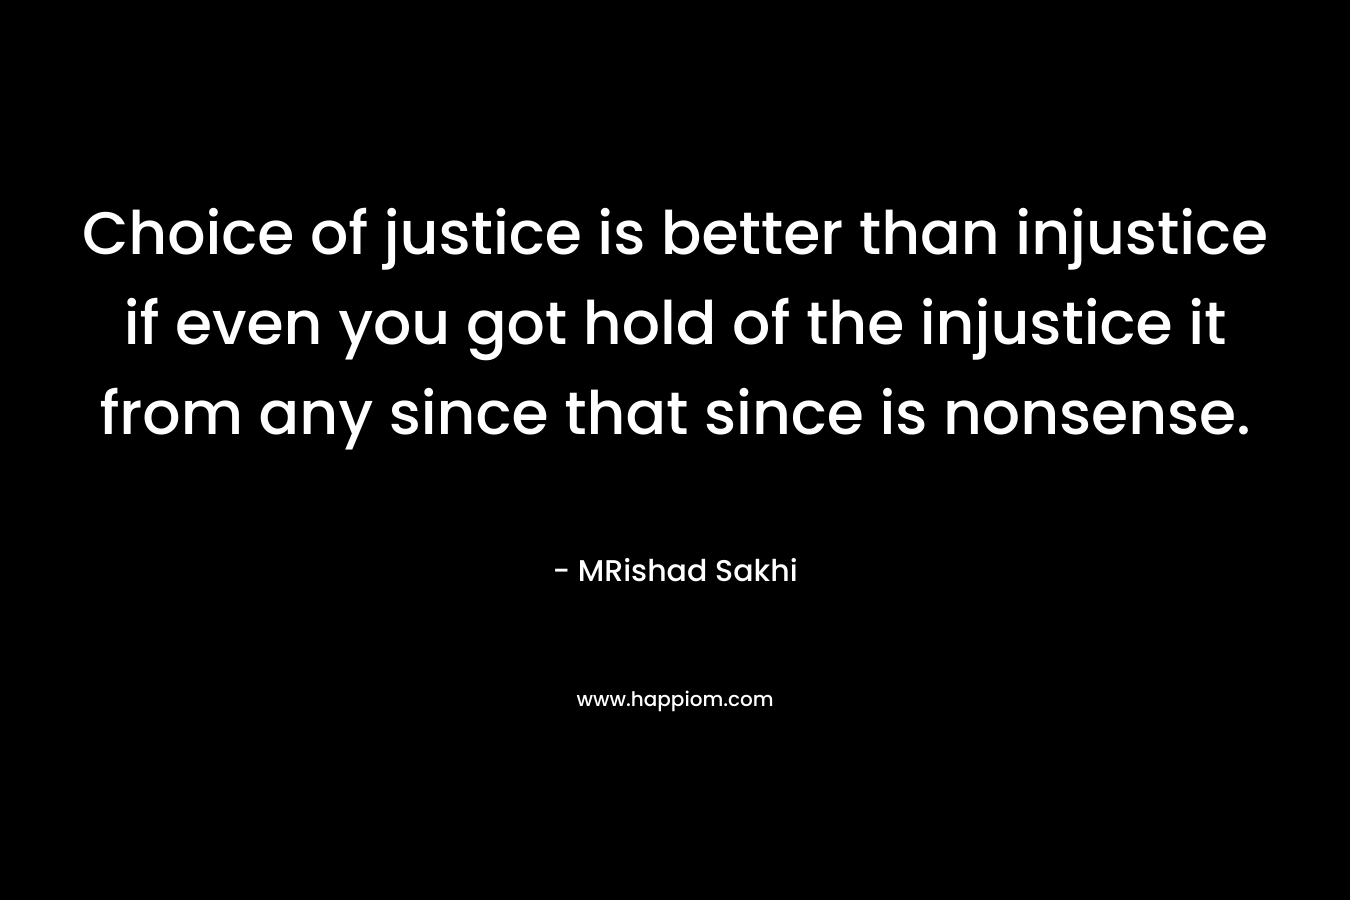 Choice of justice is better than injustice if even you got hold of the injustice it from any since that since is nonsense. – MRishad Sakhi